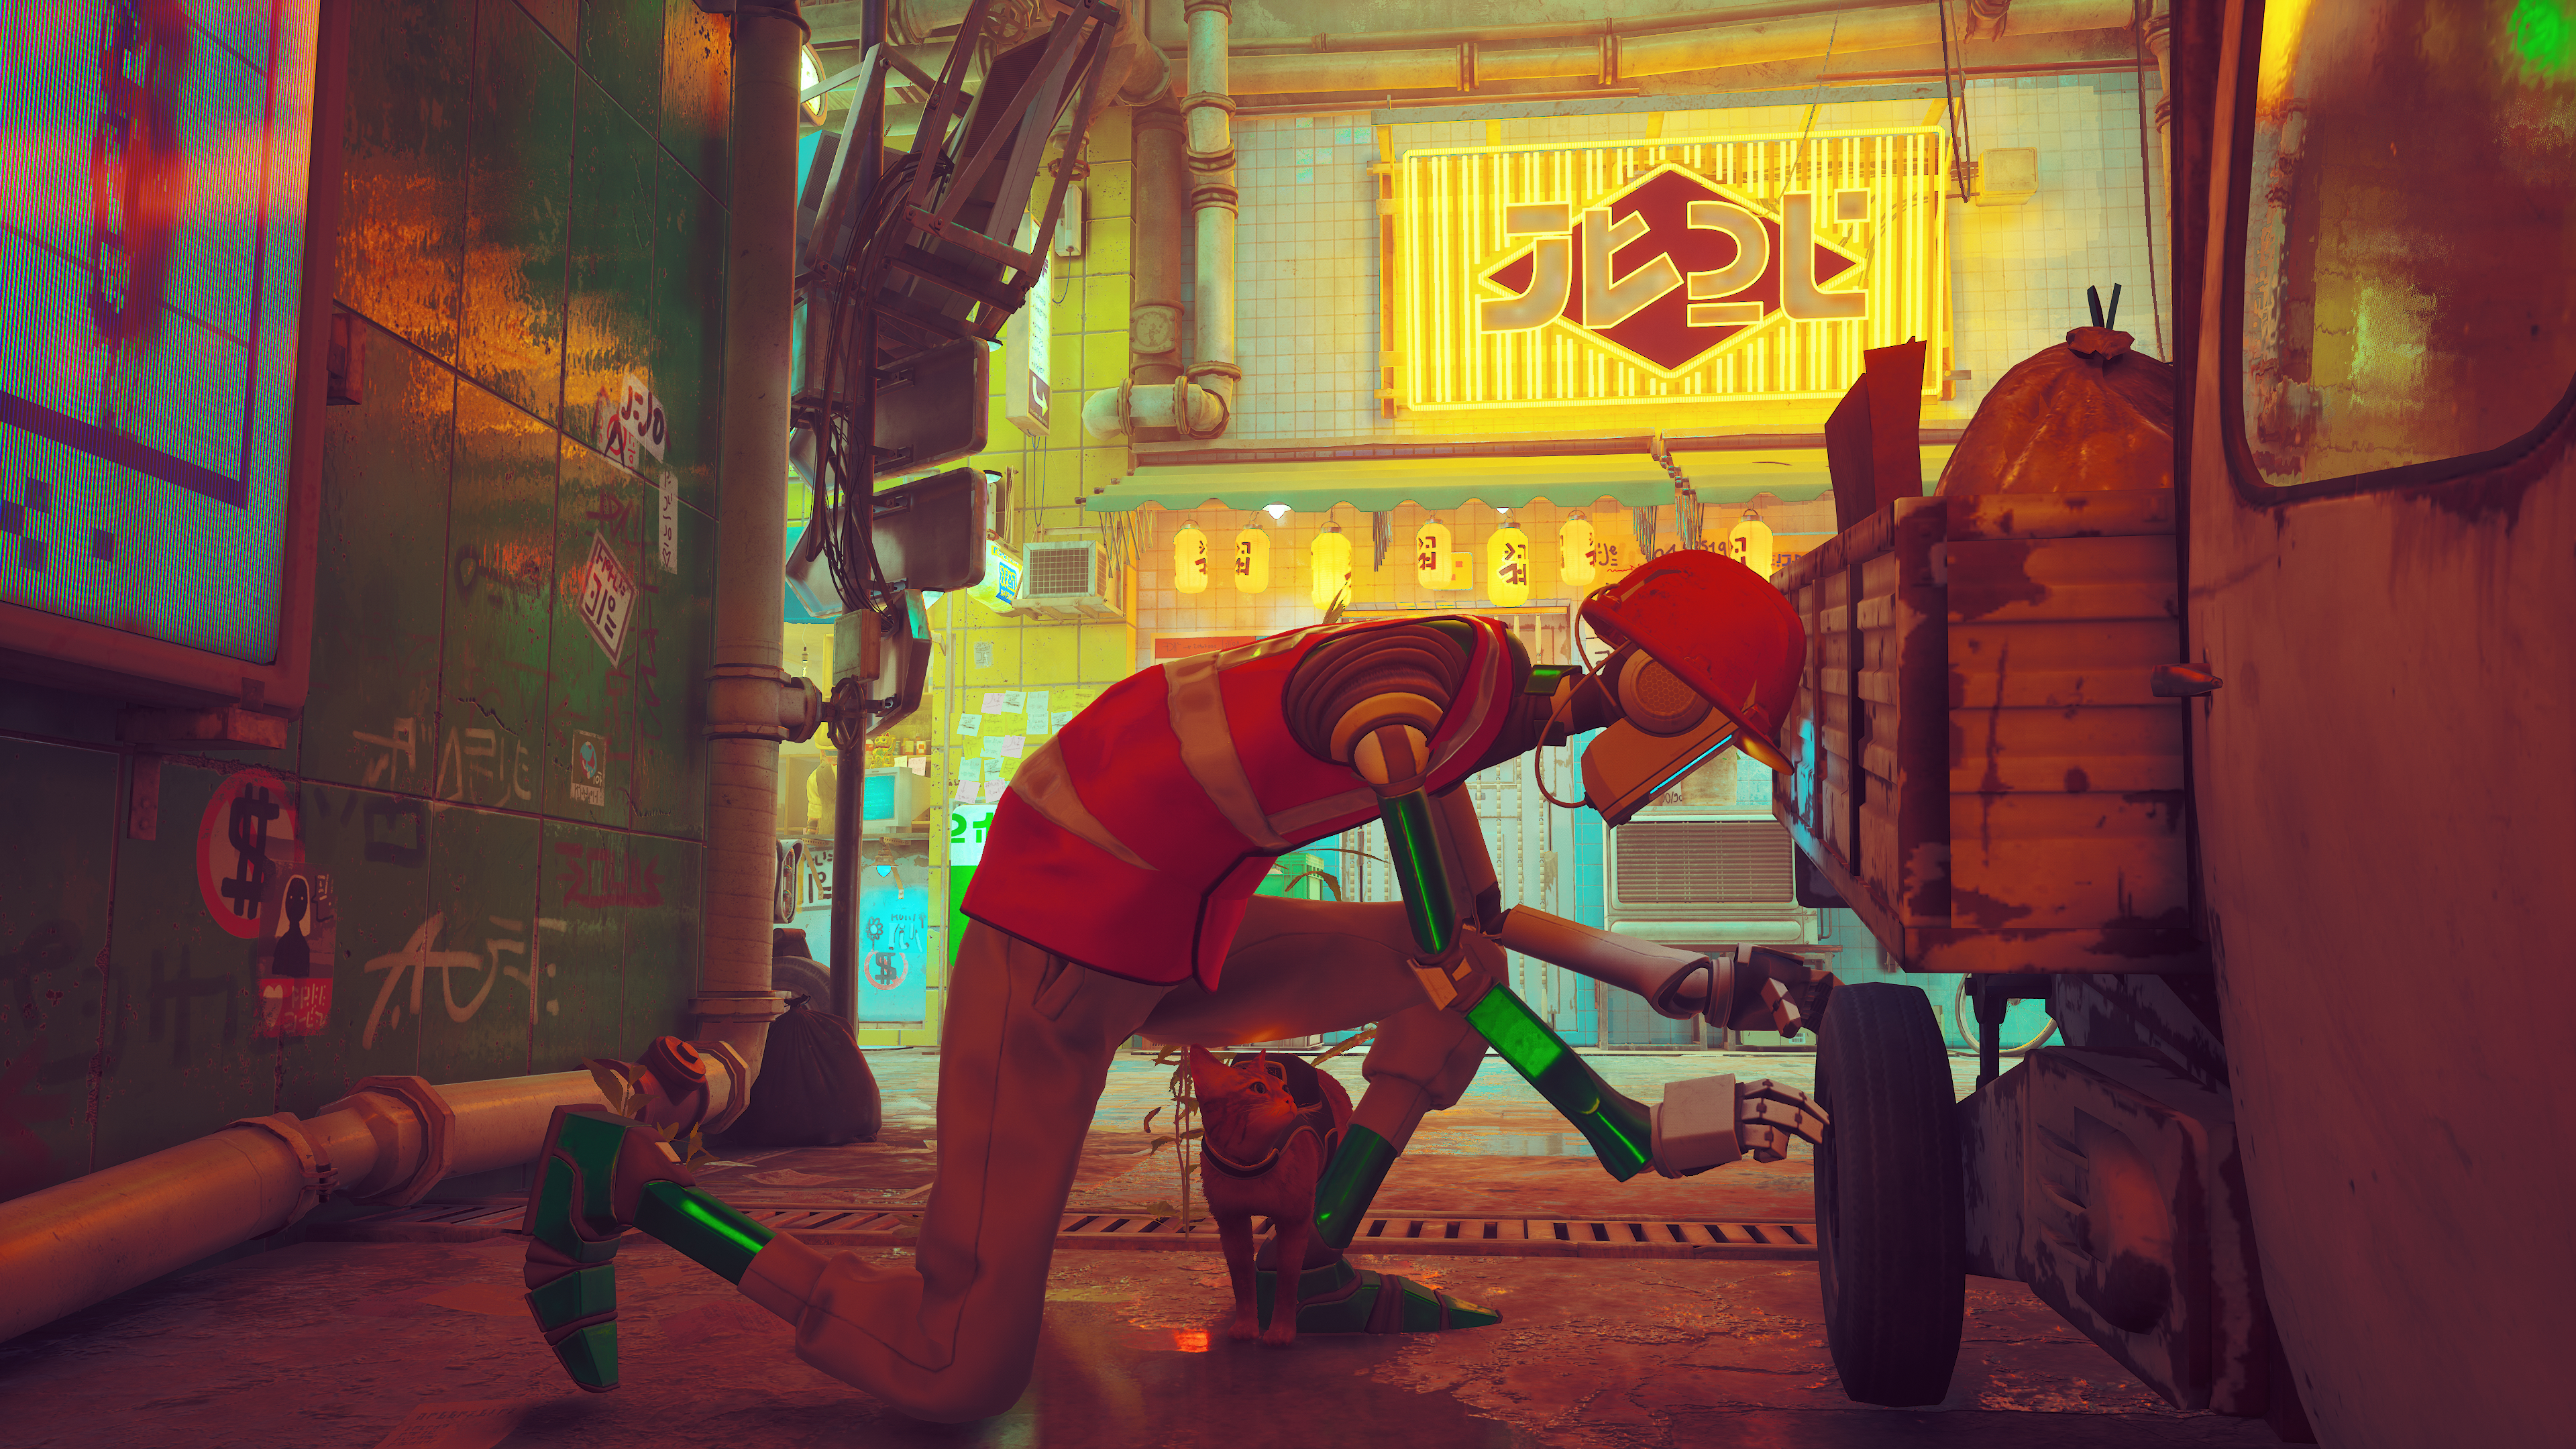 Stray' review: A cute and contained cyberpunk adventure game